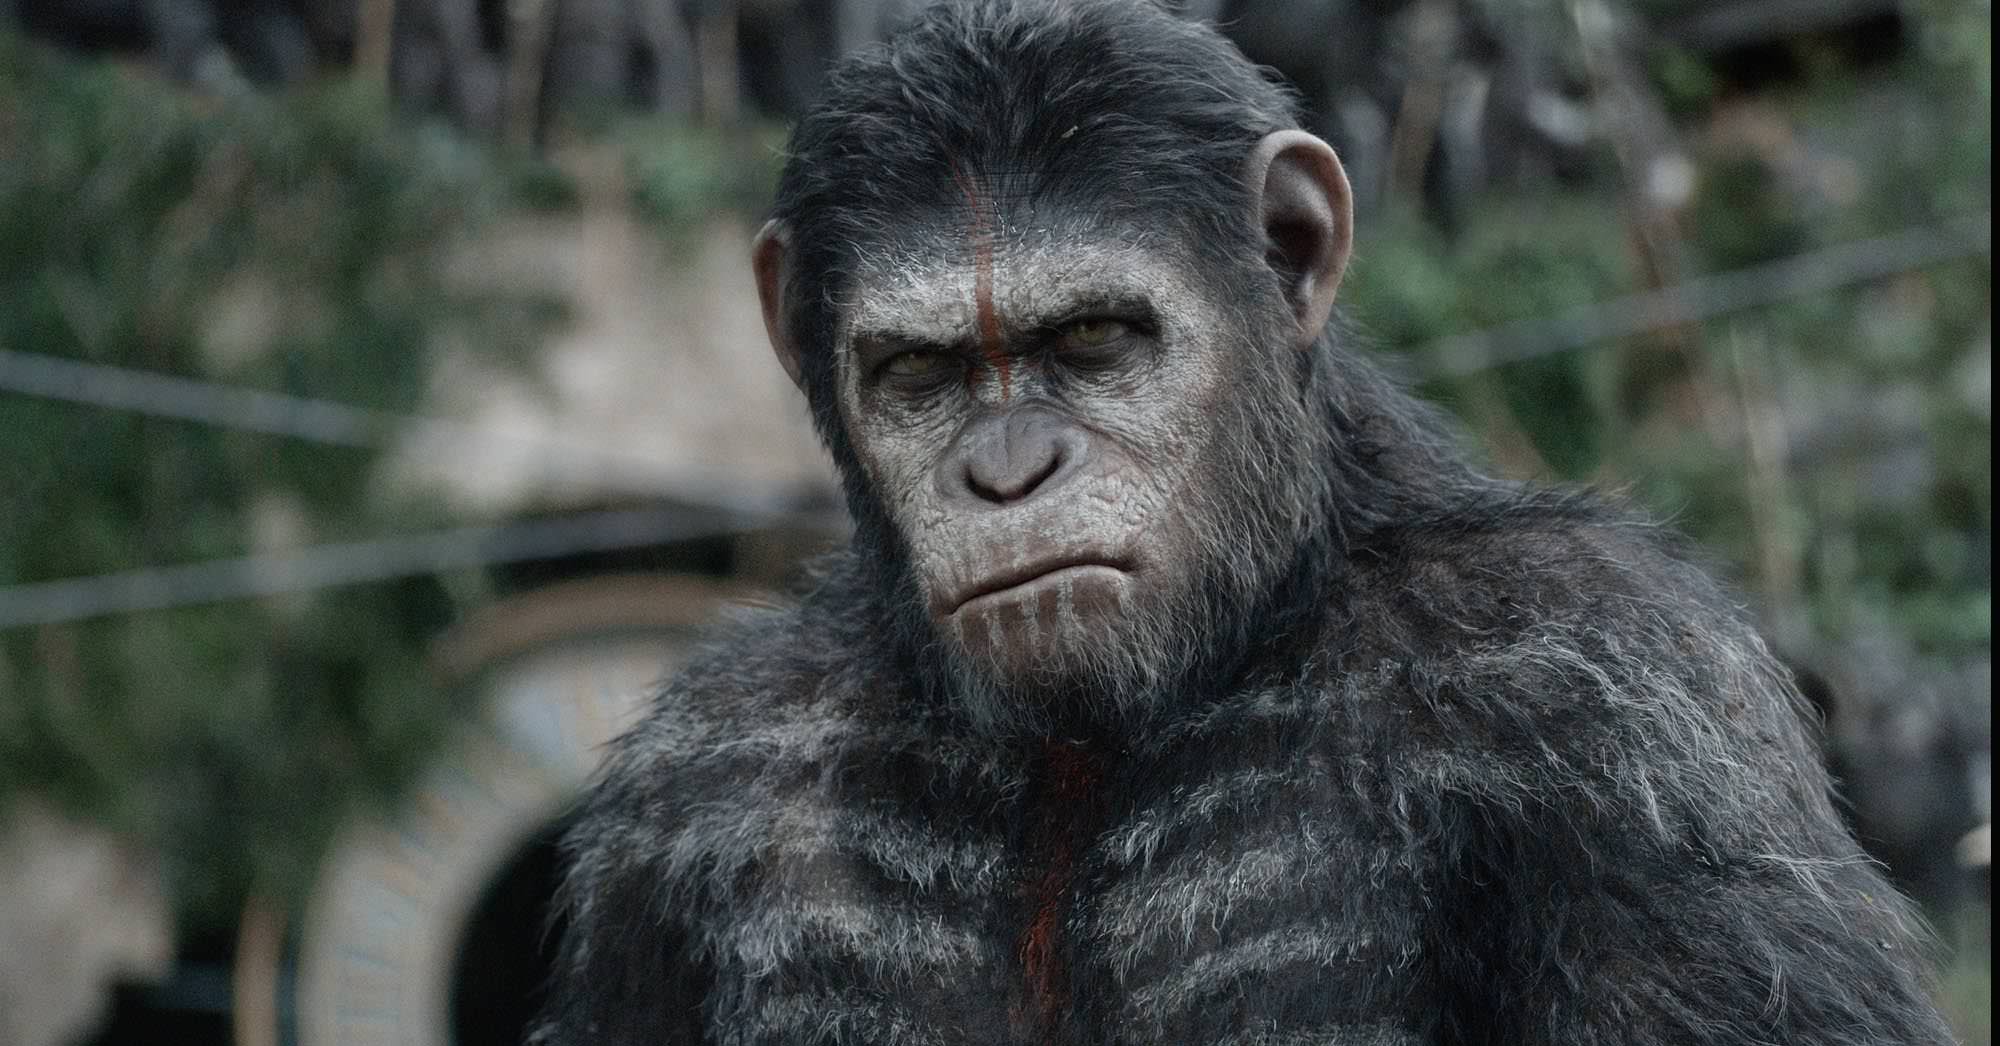 WILD WILD PODCAST #6: Dawn of the Planet of the Apes in 4DX is a ...